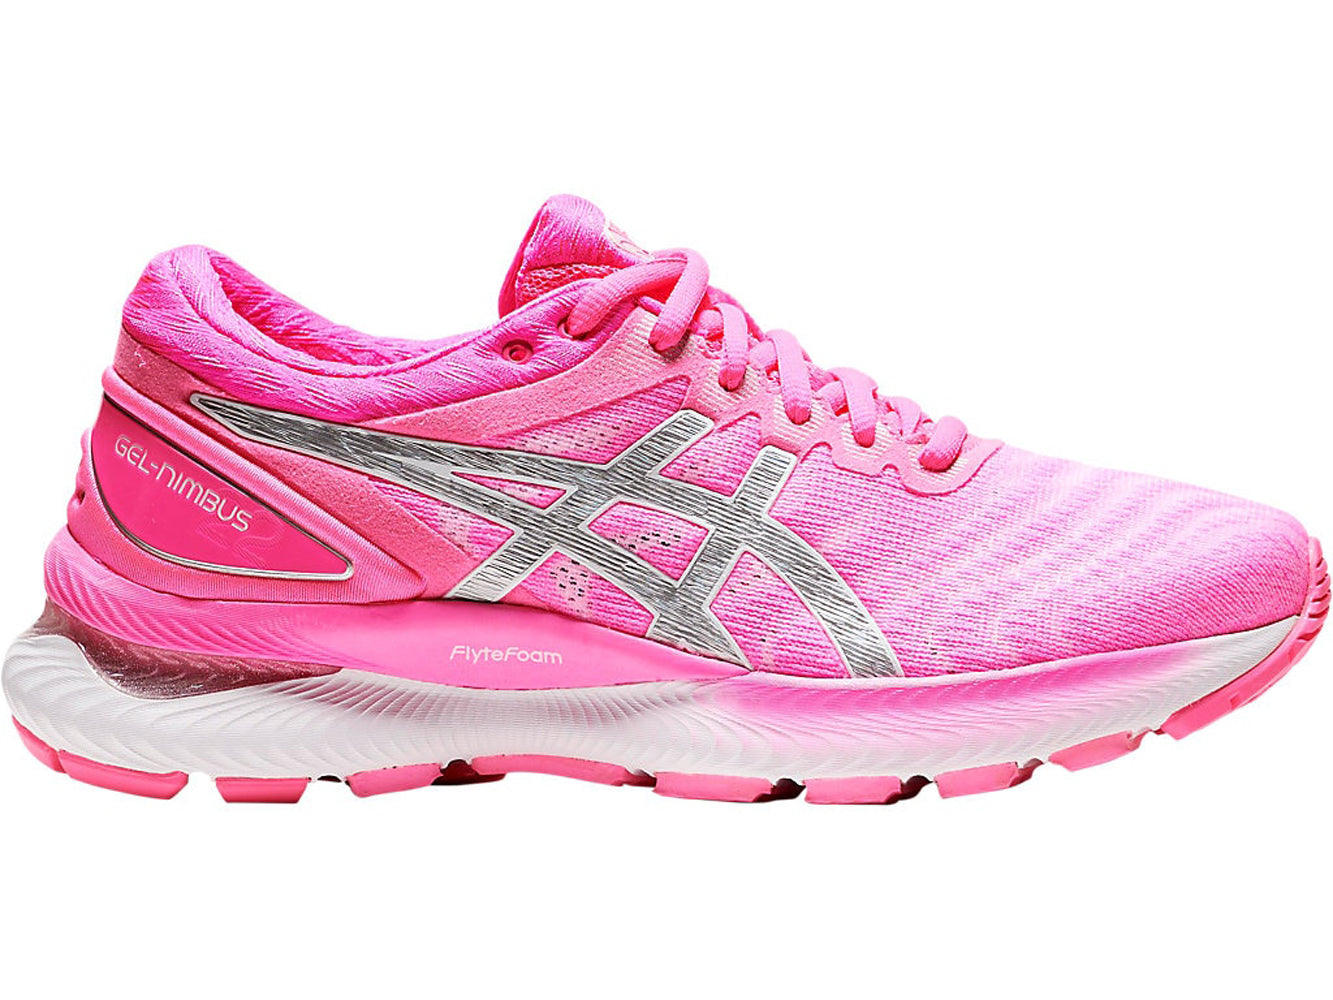 Women's Asics GEL-Nimbus 22 Running Shoe in Hot Pink/Pure Silver from the side